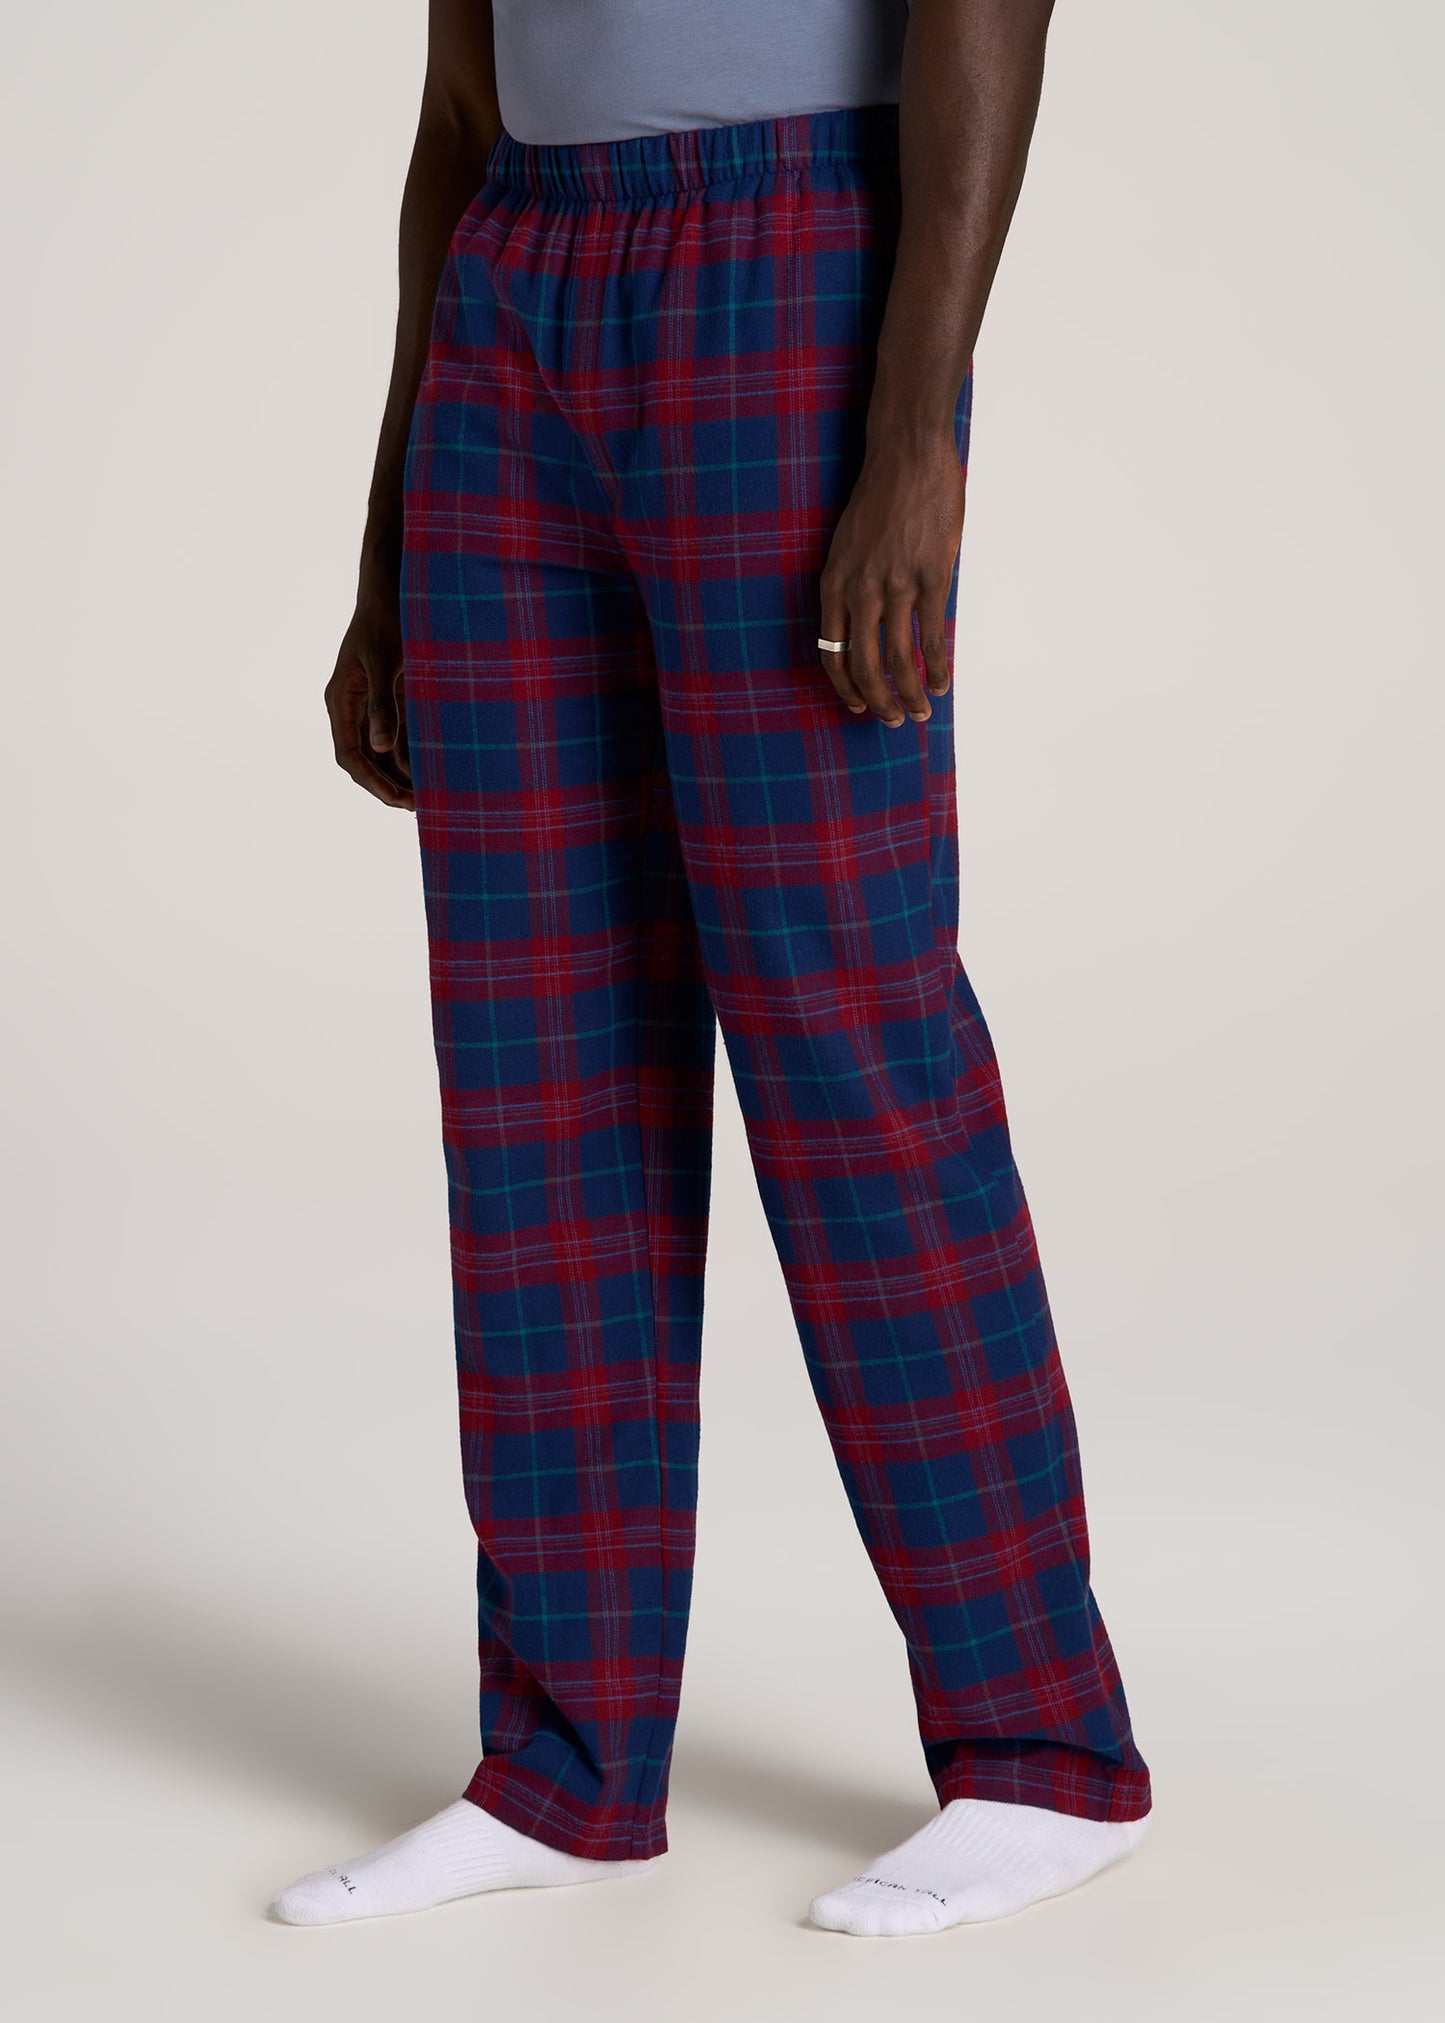 Plaid Pajama Pants for Tall Men in Blue and Red Tartan